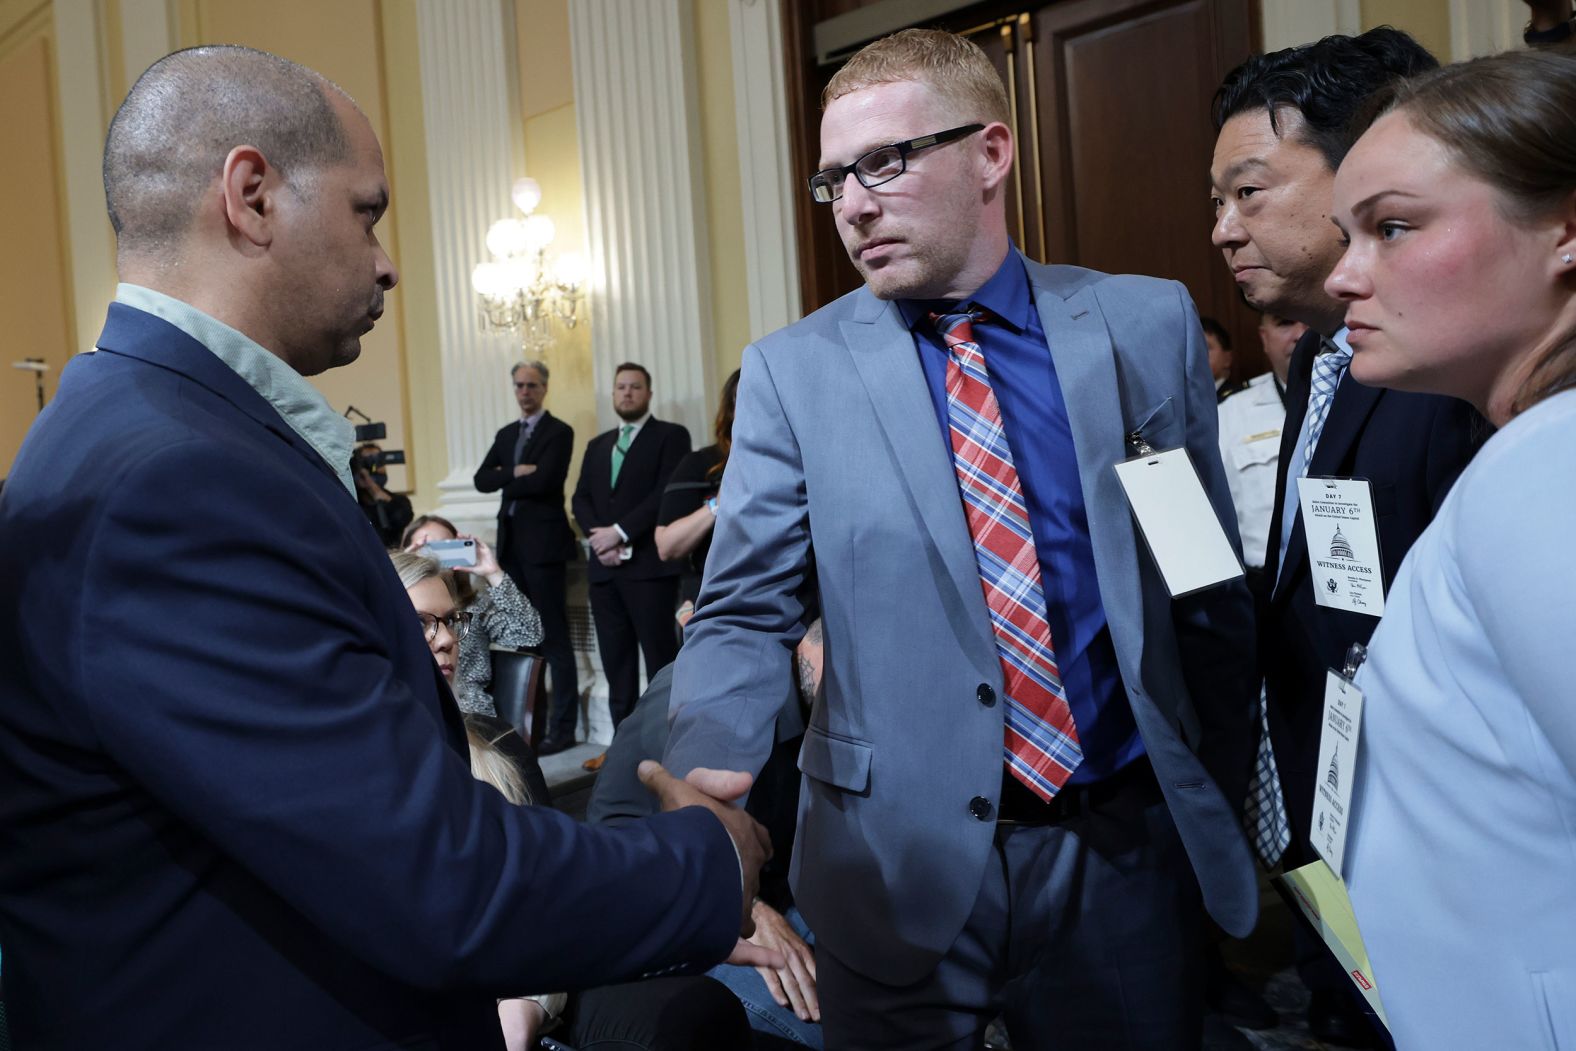 Stephen Ayres, second from left, shakes hands with Gonell after giving testimony to the committee. Ayres was one of the Capitol rioters on January 6. Gonell was one of the officers who defended the Capitol that day, and we learned that the injuries he suffered in the attack <a href="index.php?page=&url=https%3A%2F%2Fwww.cnn.com%2Fpolitics%2Flive-news%2Fjanuary-6-hearings-july-12%2Fh_041b239e77bddbc2c84274b0ca1adbdf" target="_blank">are forcing him to quit policing.</a>